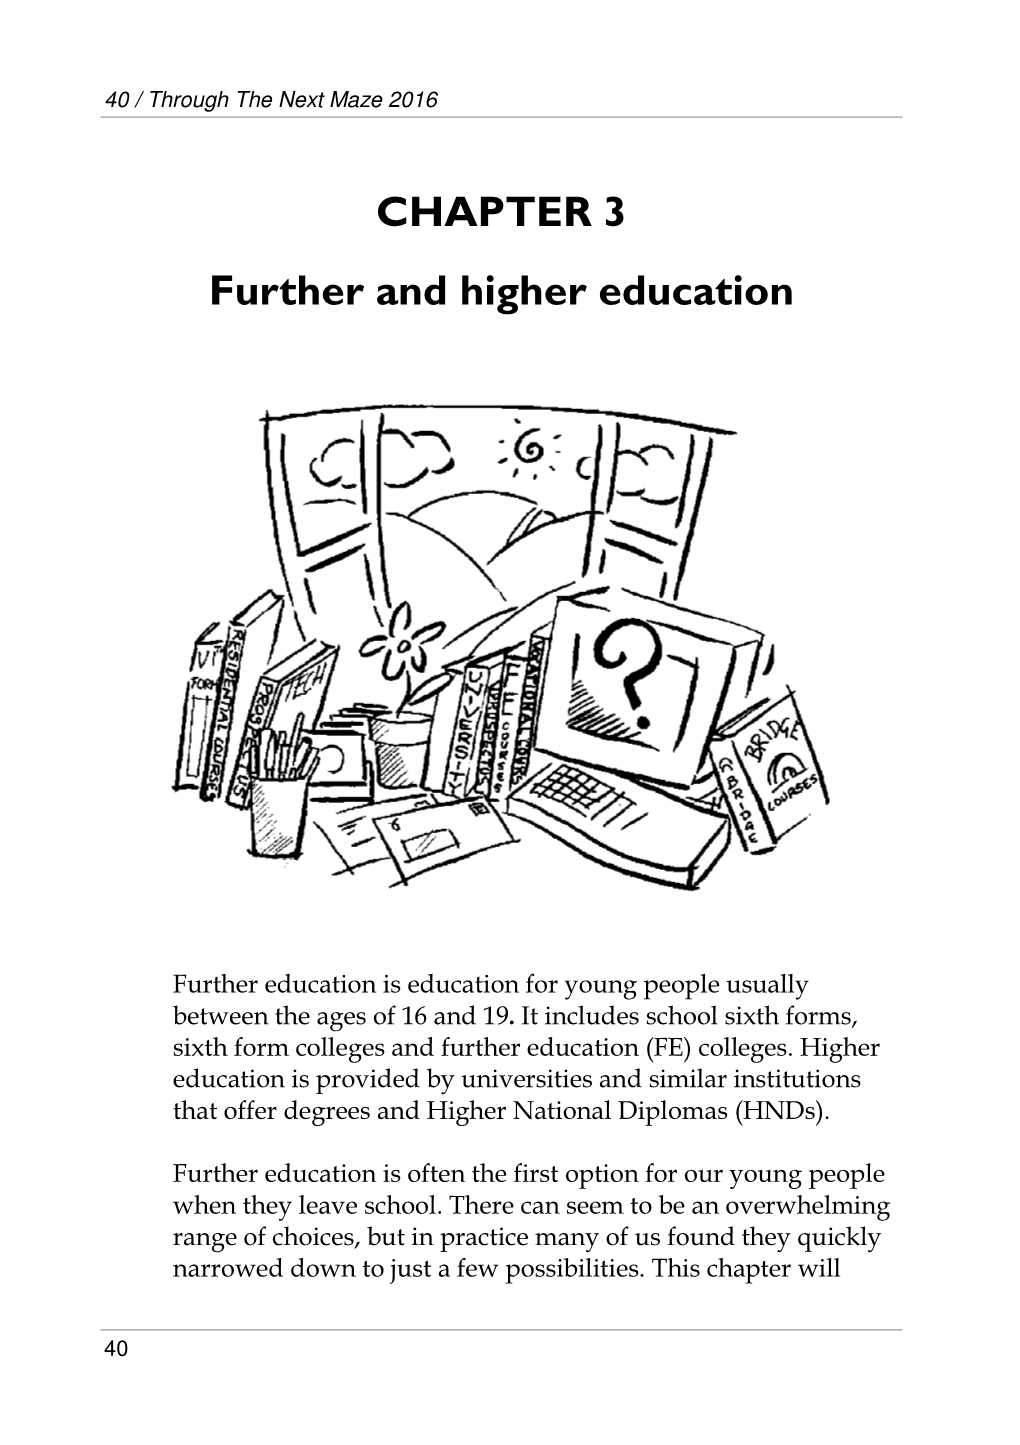 CHAPTER 3 Further and Higher Education